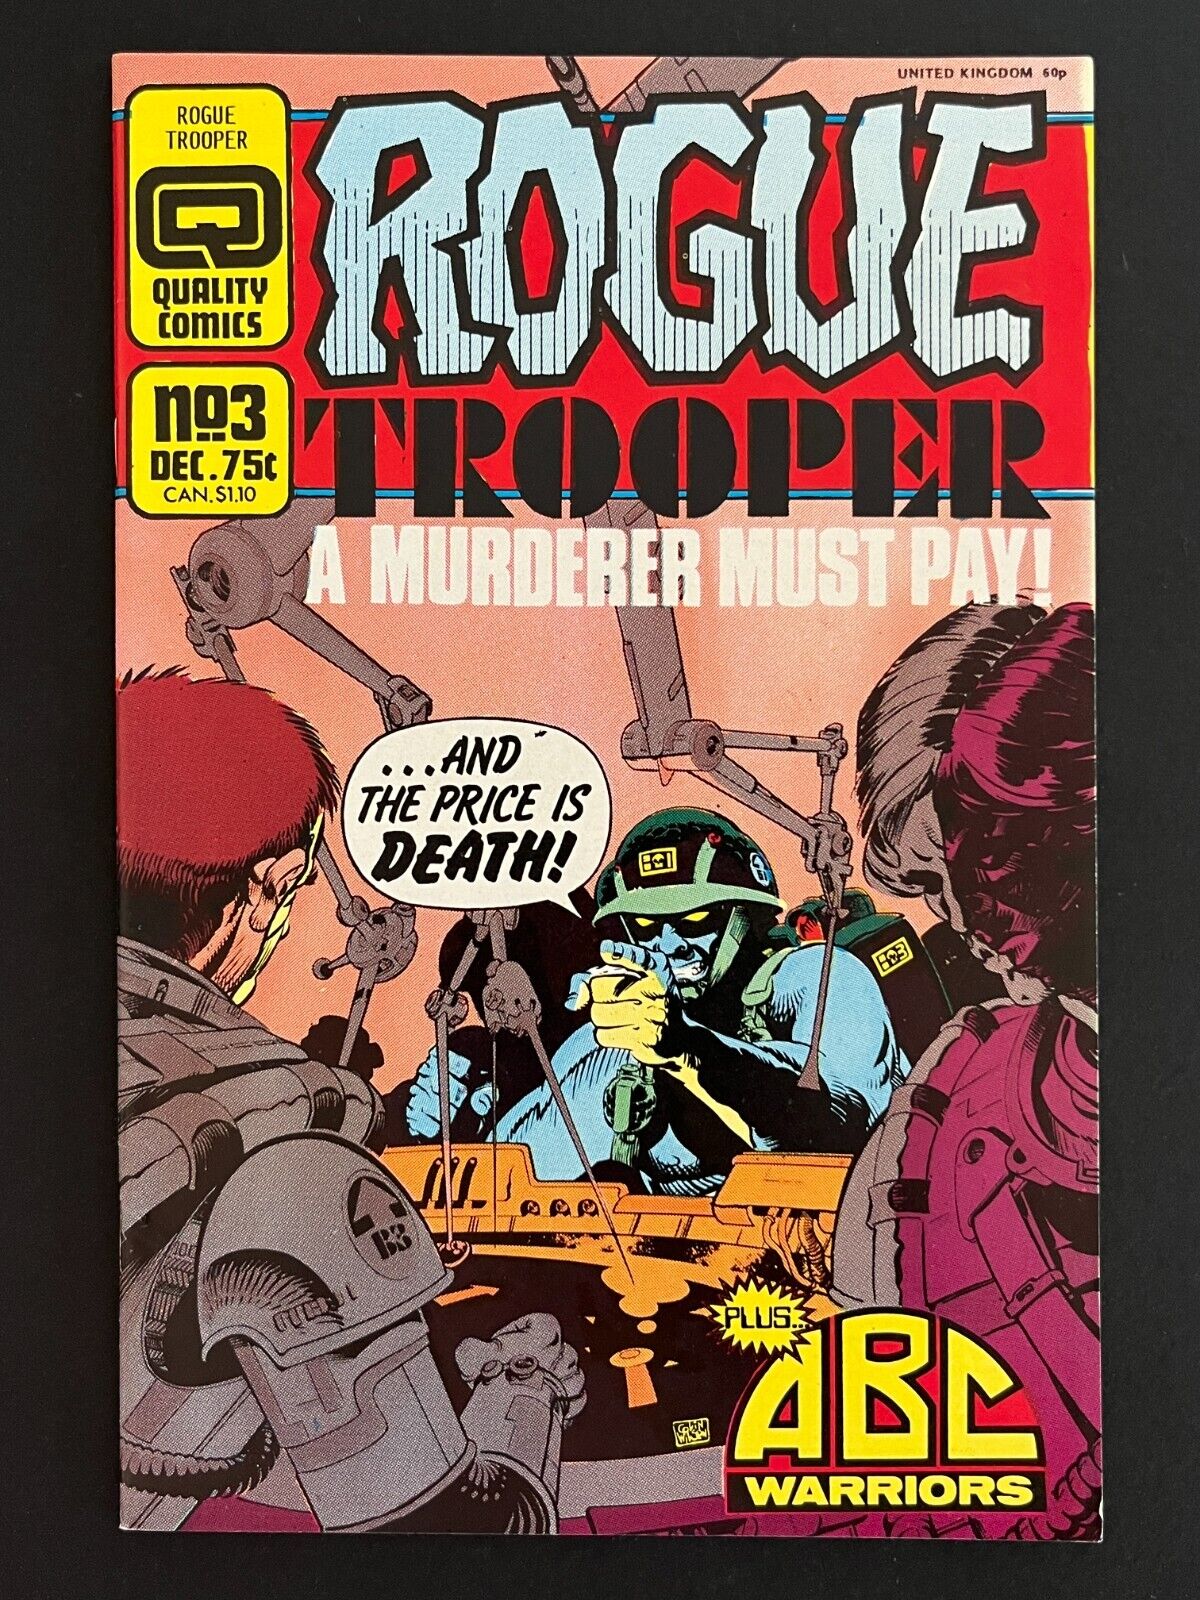 Rogue Trooper #3 (Quality Comics, 1986, Dave Gibbons art, NM) COMBINE SHIPPING